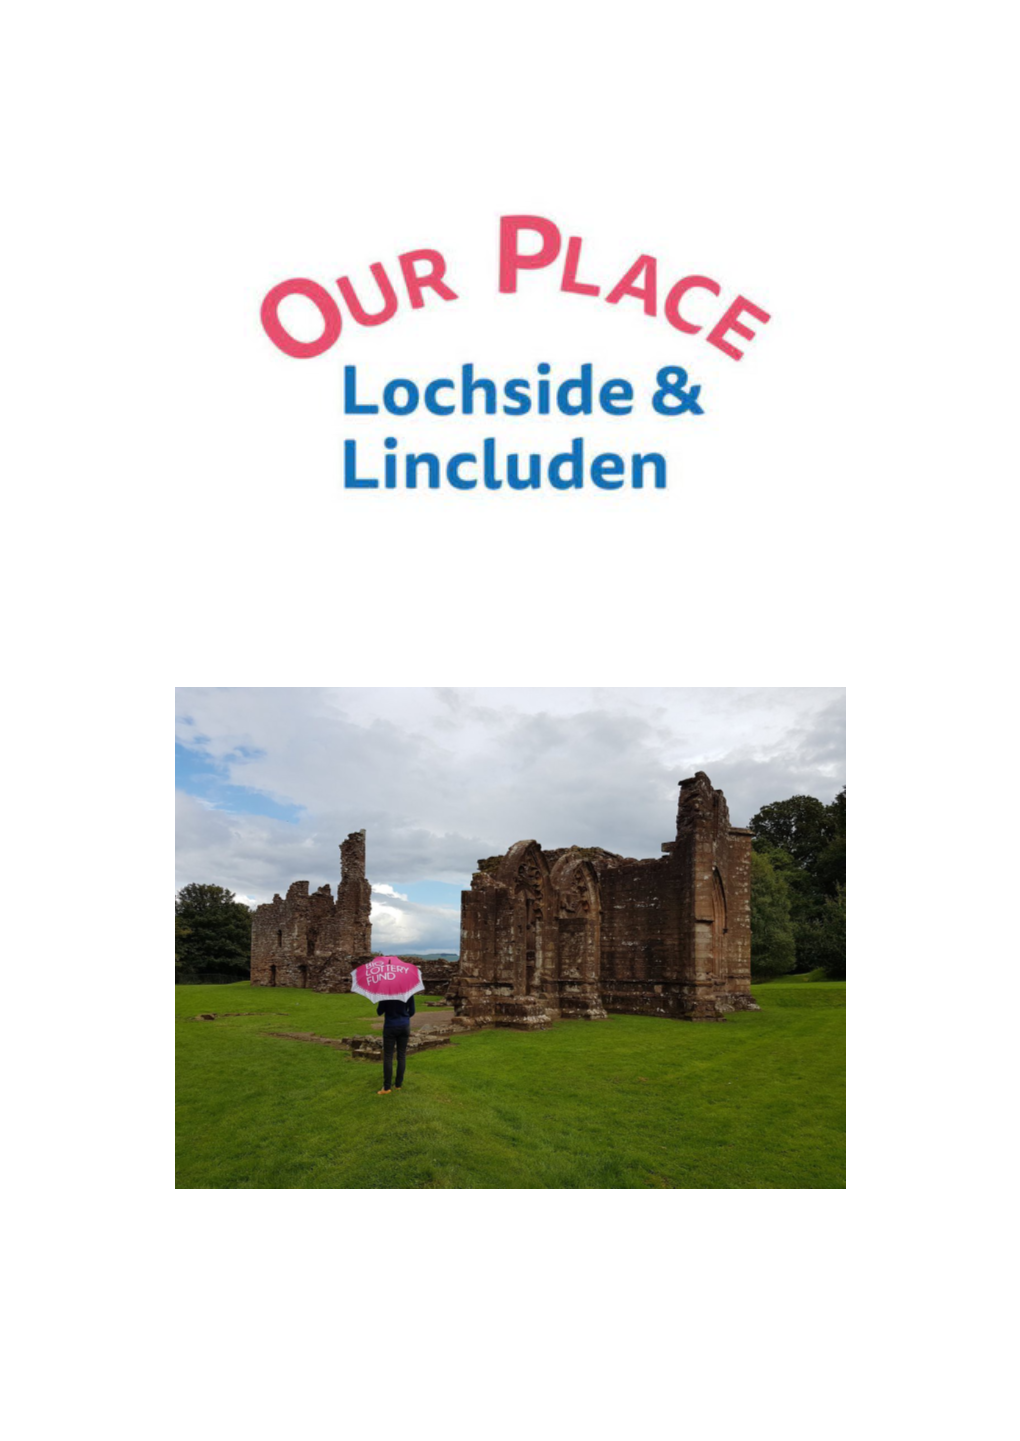 1.5 Million for Lochside and Lincluden